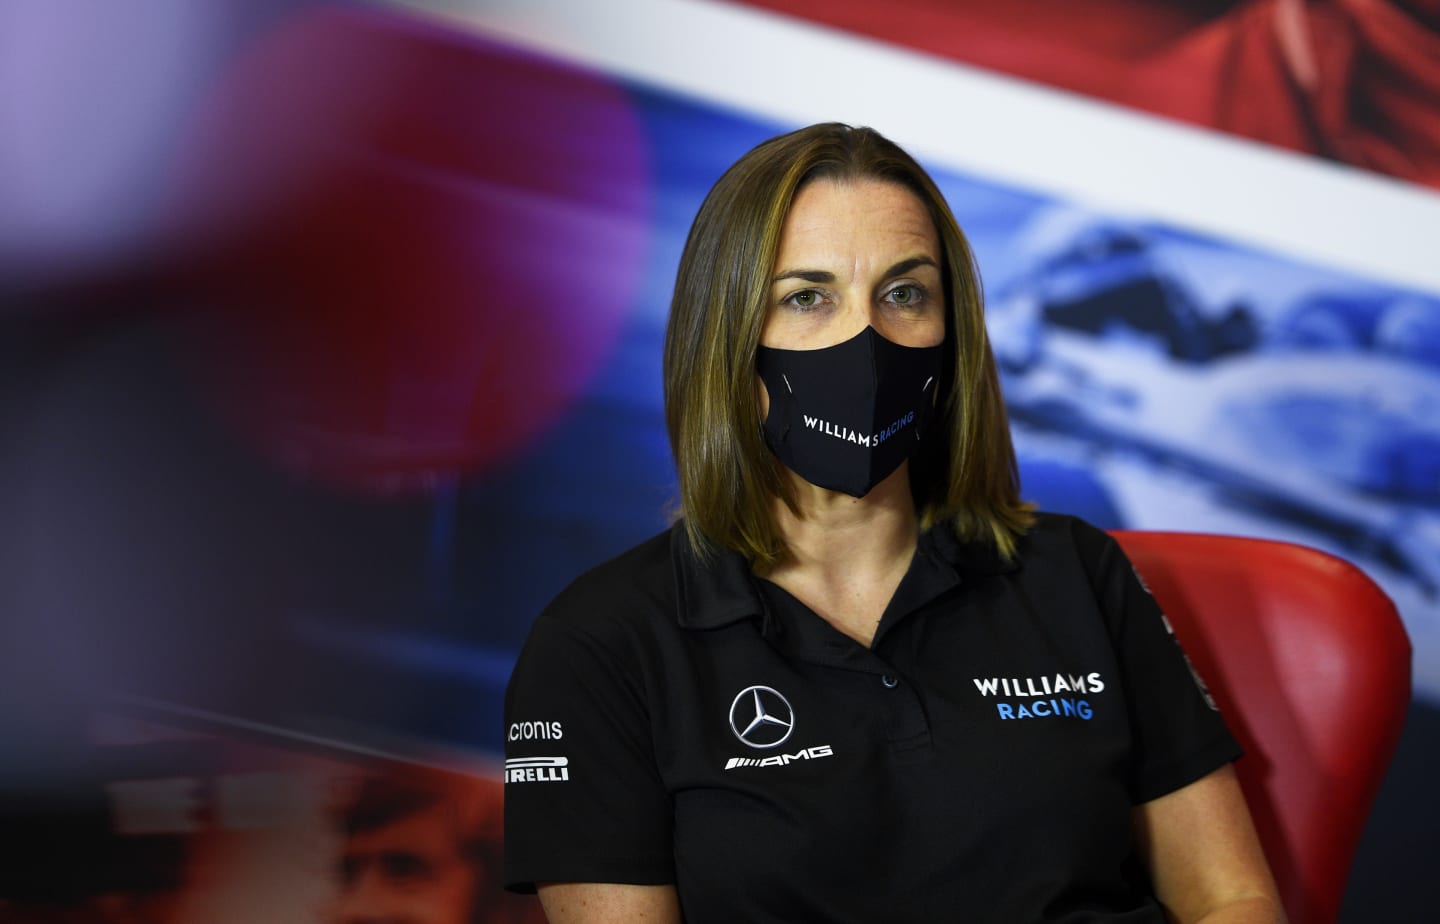 NORTHAMPTON, ENGLAND - AUGUST 07: Williams Deputy Team Principal Claire Williams talks in the Team Principals Press Conference during practice for the F1 70th Anniversary Grand Prix at Silverstone on August 07, 2020 in Northampton, England. (Photo by Rudy Carezzevoli/Getty Images)